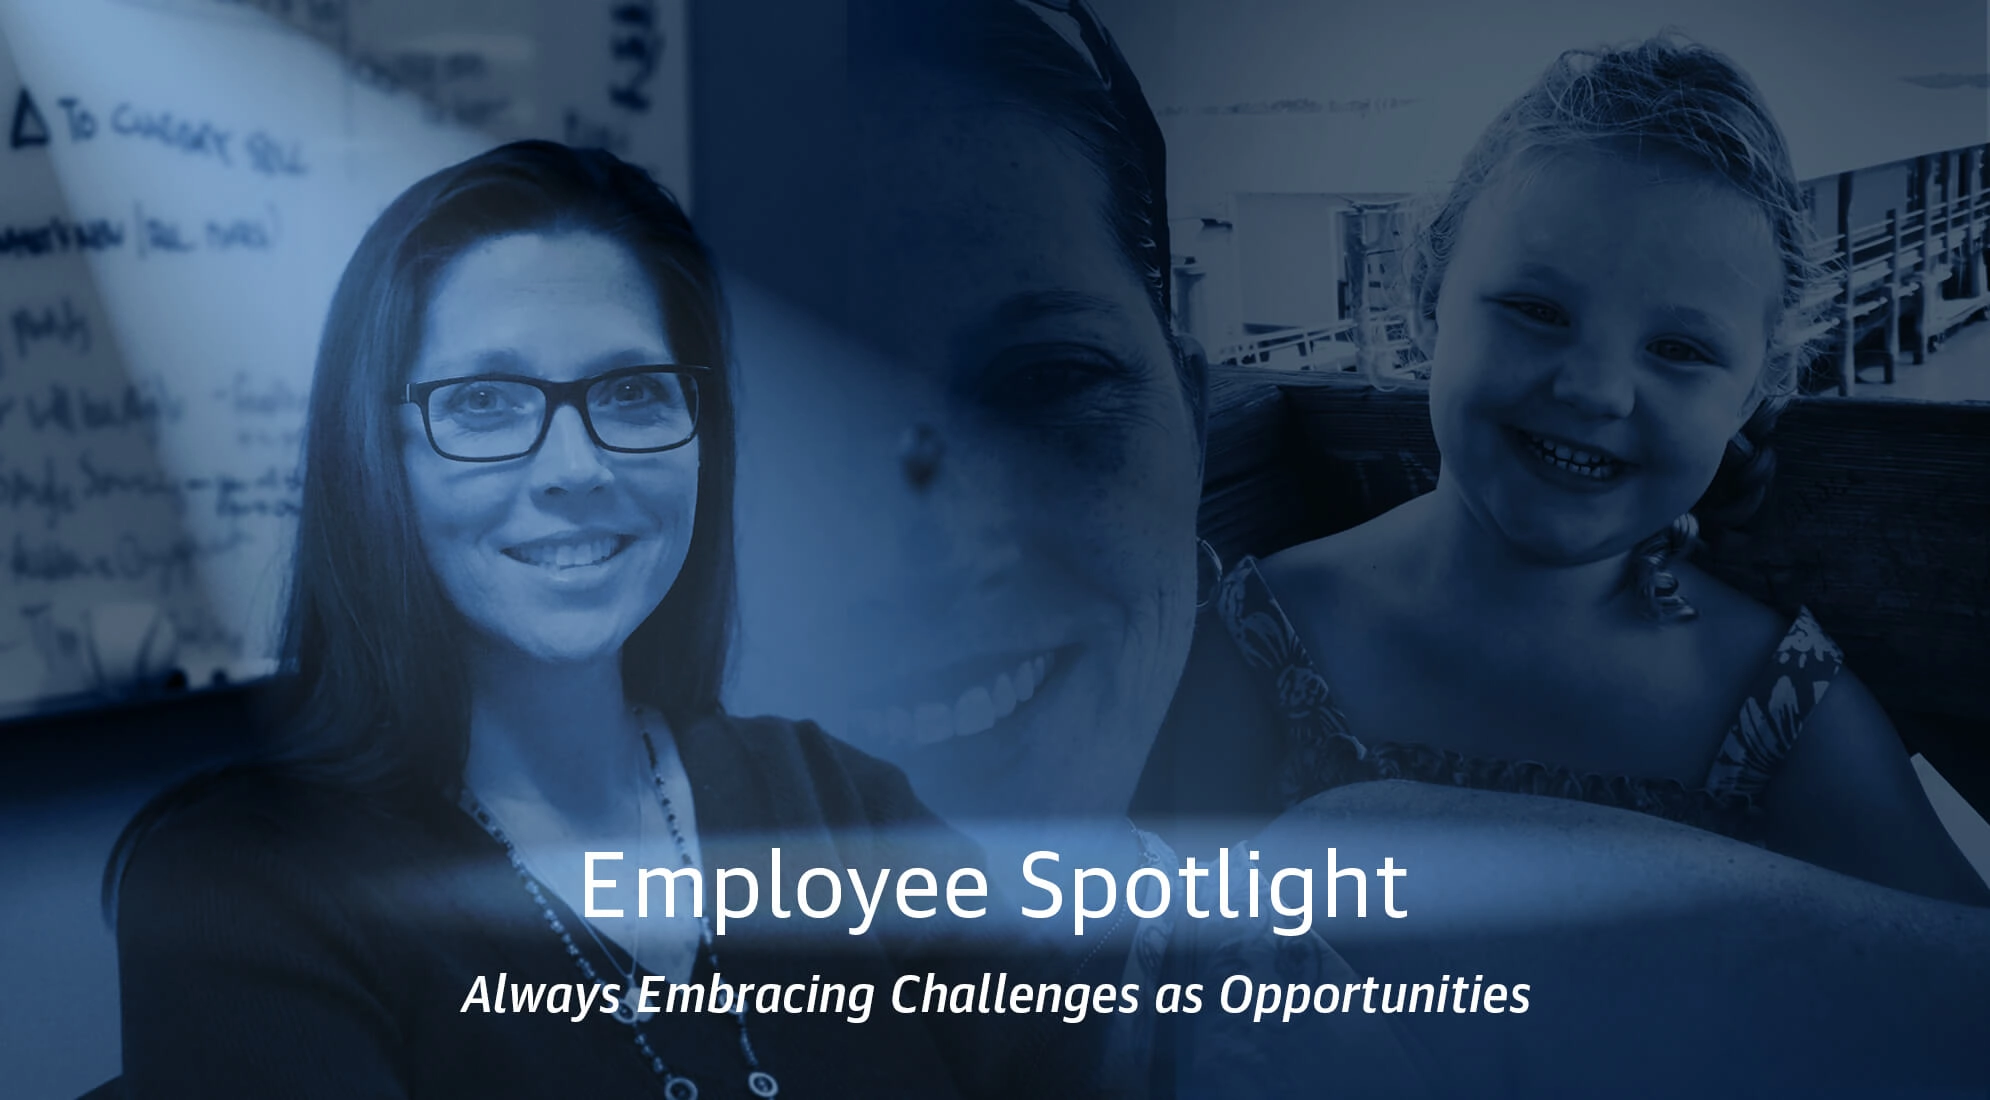 Employee Spotlight: Continuous Improvement is Her Way of Life 2